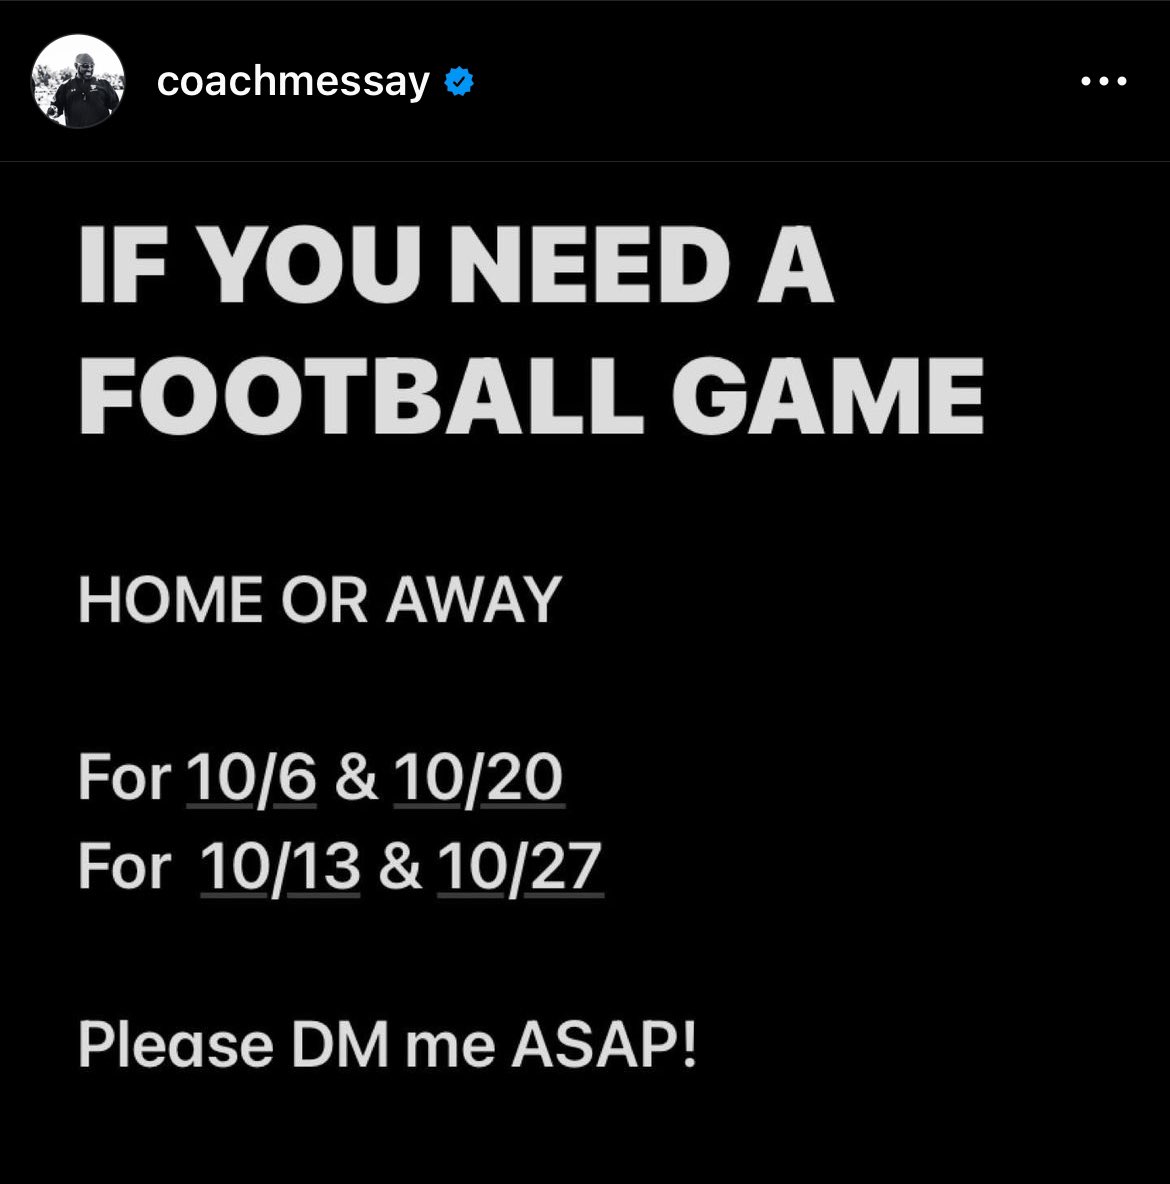 ‼️ANY HIGH SCHOOL FOOTBALL TEAMS‼️ We are looking for games this season on the dates listed below, we will play ANYONE, ANYWHERE, home or away, if you need a game for one of those dates, please dm us @CoachJdubSFA or @CoachMessay ASAP!!